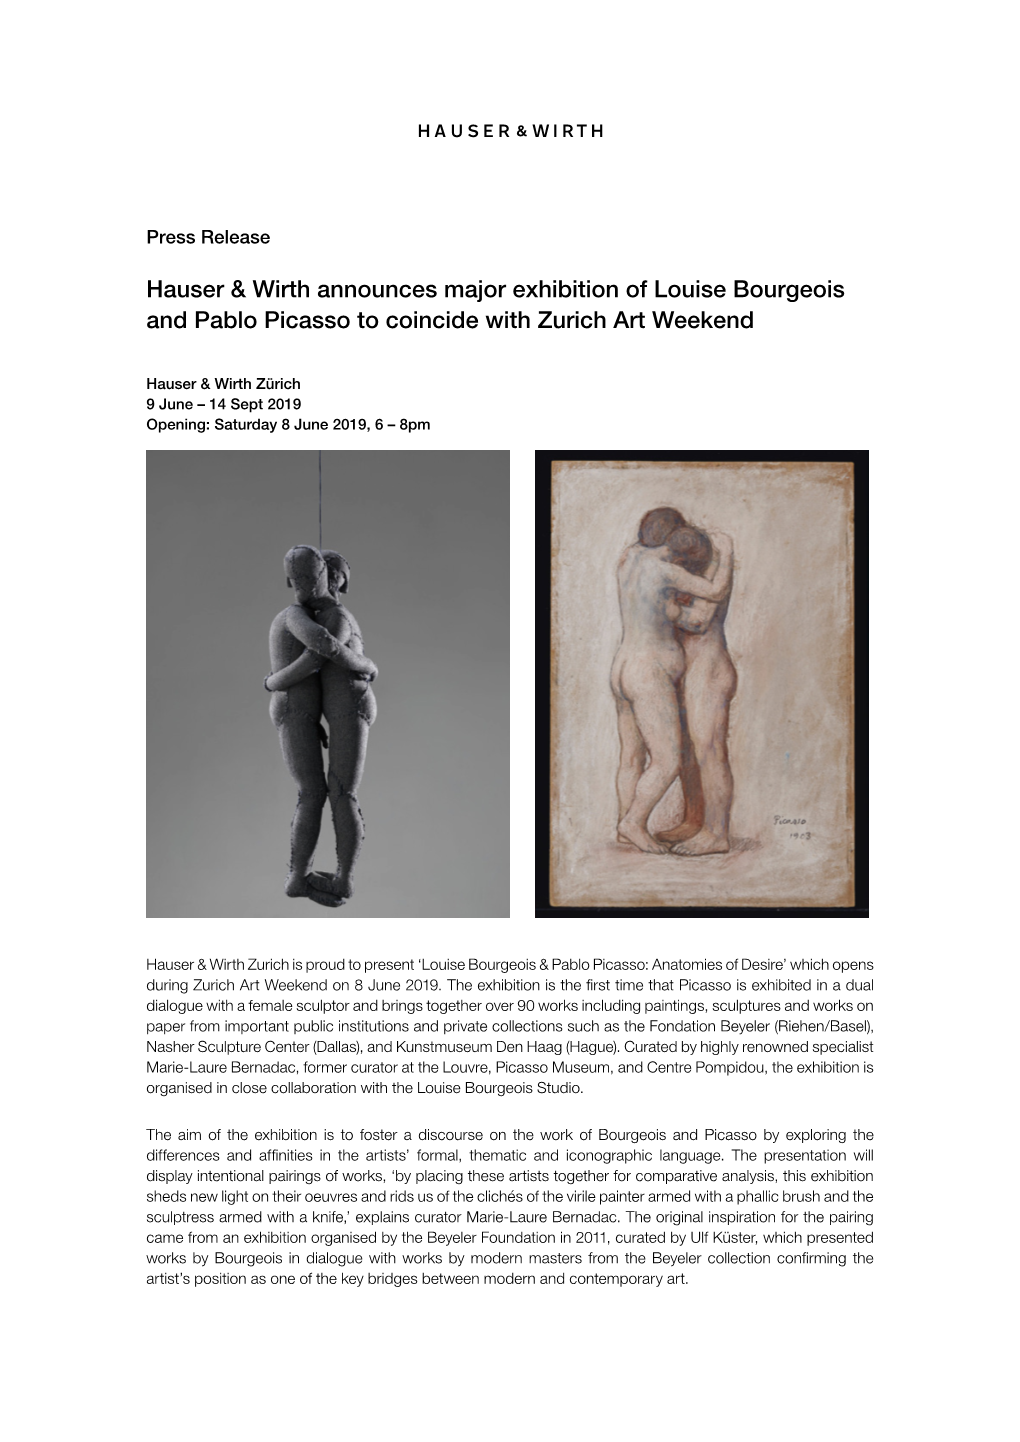 Hauser & Wirth Announces Major Exhibition of Louise Bourgeois And